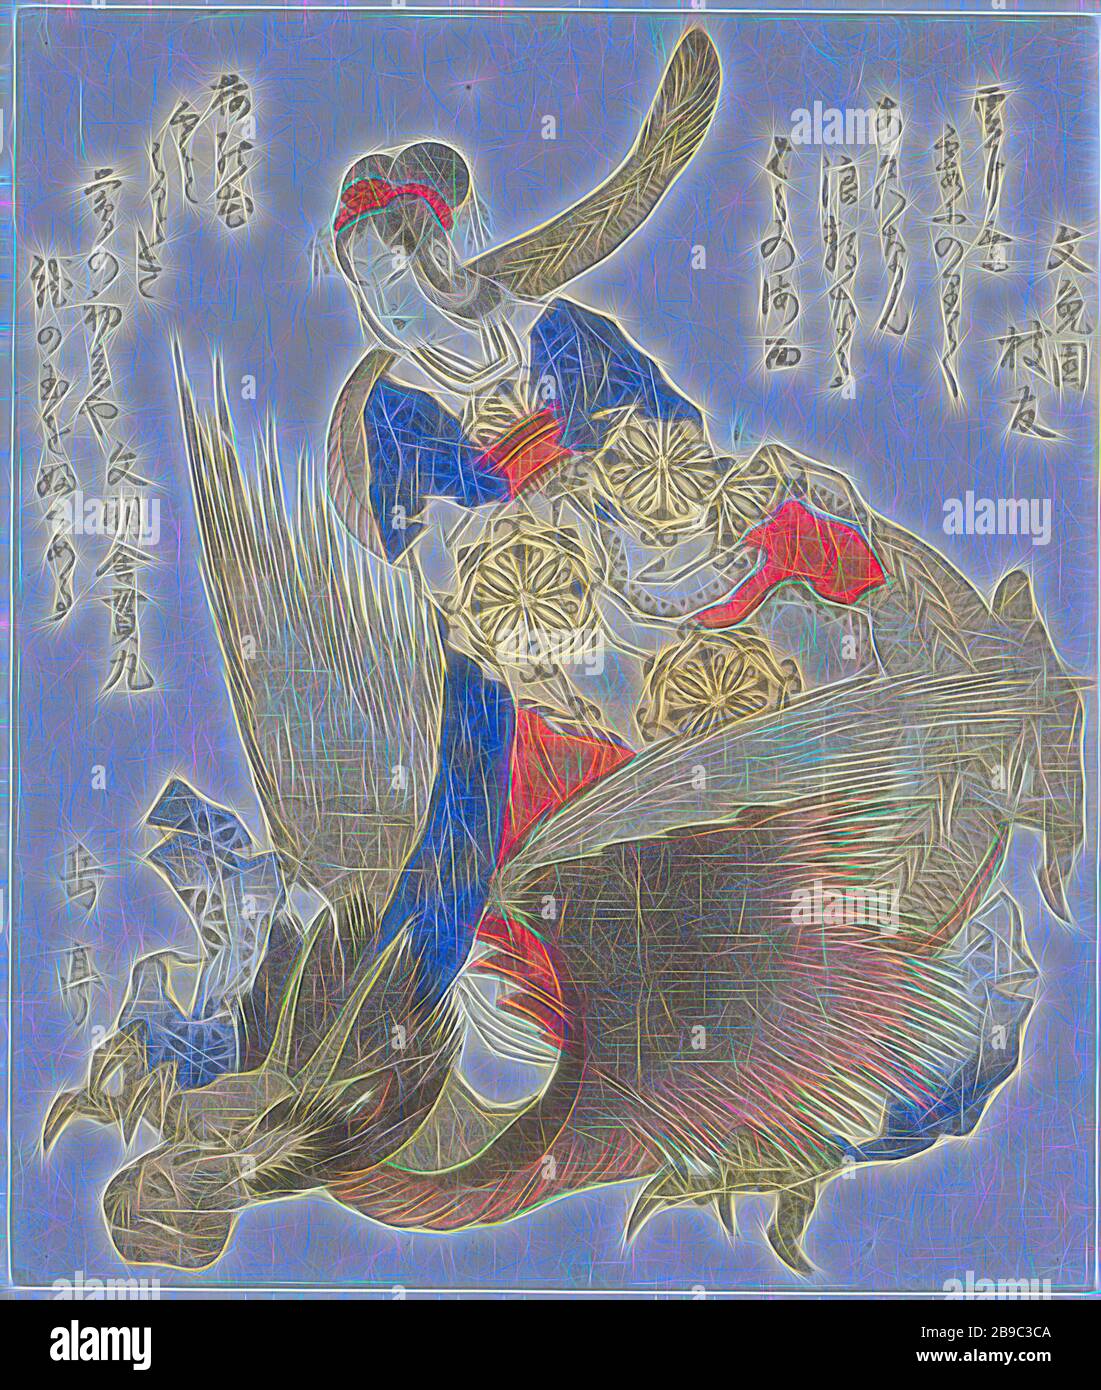 Woman with dragon, A woman in Chinese costume on a dragon. The woman could be the goddess Benten or the Chinese goddess of the West, Hsi Wang Mu. With two poems, dragon, Yashima Gakutei (mentioned on object), Japan, 1820, paper, colour woodcut, h 240 mm × w 173 mm, Reimagined by Gibon, design of warm cheerful glowing of brightness and light rays radiance. Classic art reinvented with a modern twist. Photography inspired by futurism, embracing dynamic energy of modern technology, movement, speed and revolutionize culture. Stock Photo